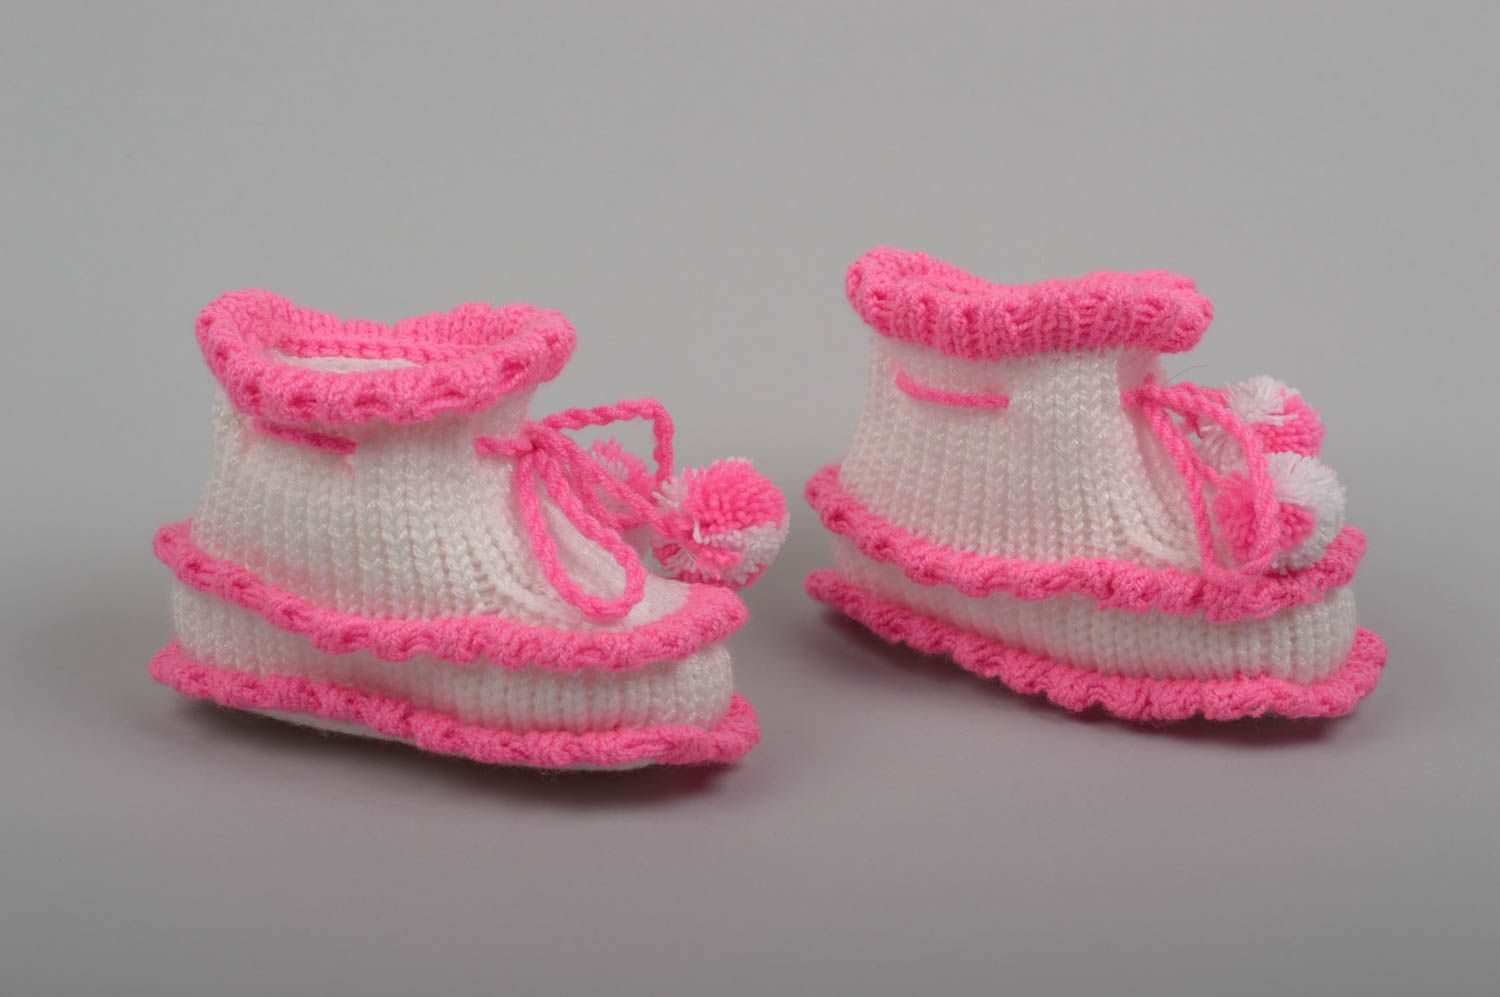 Handmade beautiful babies shoes designer clothes for children stylish accessory photo 2